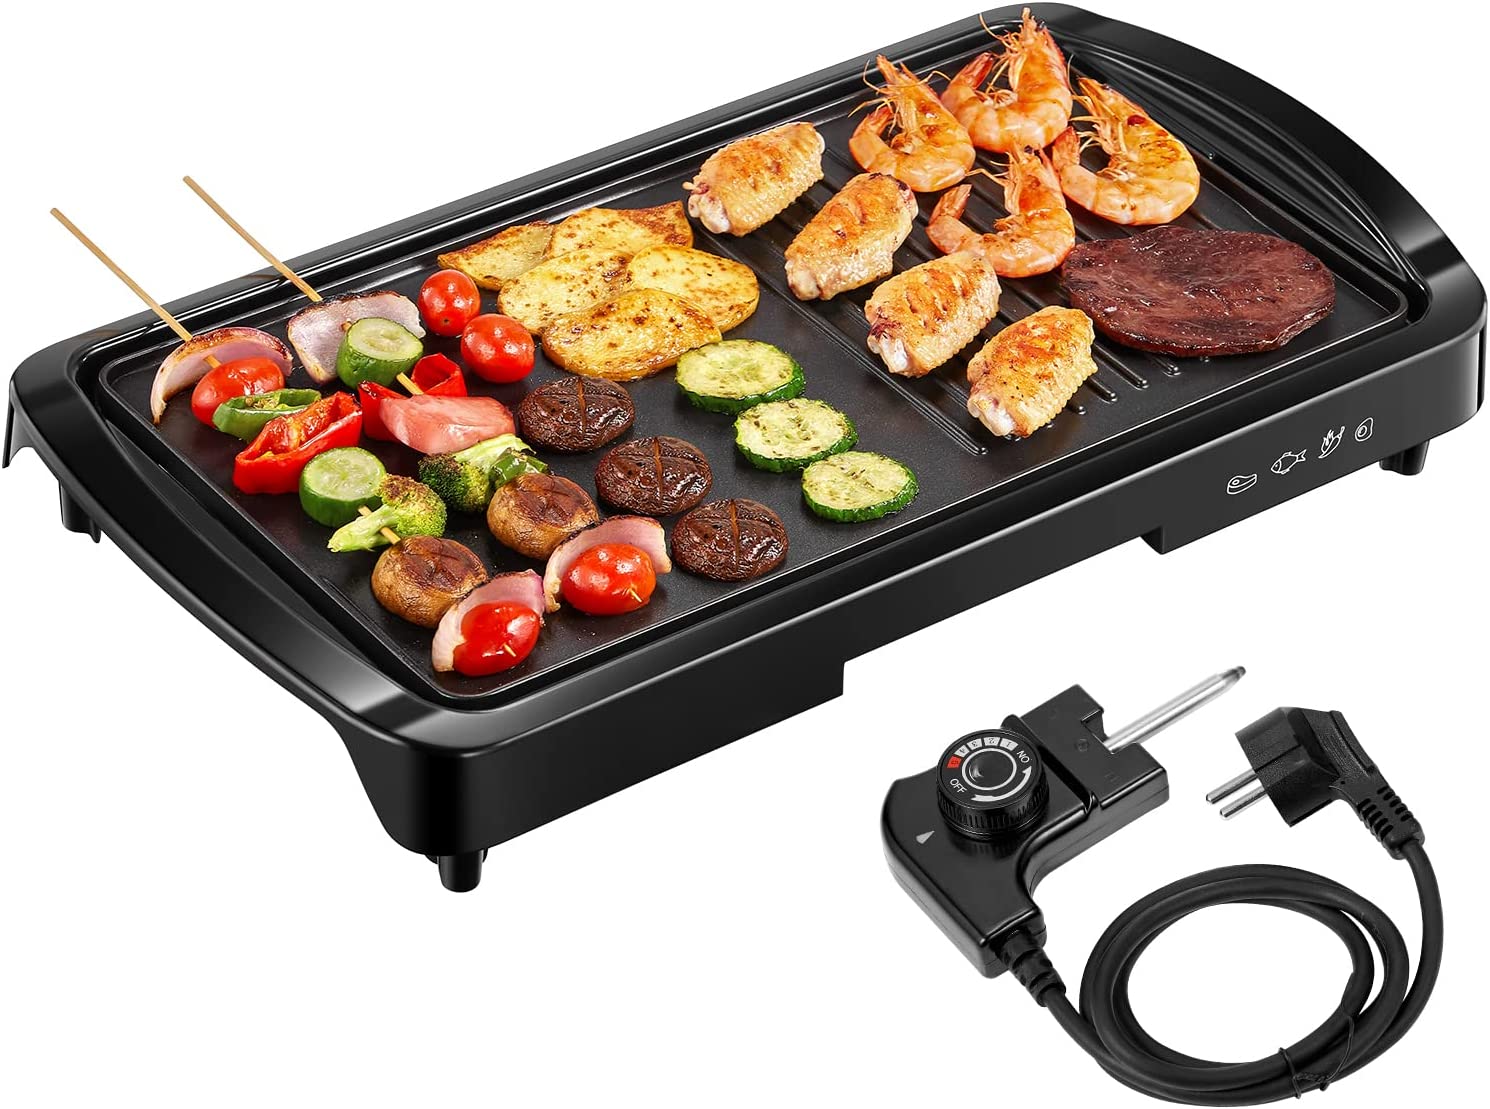 Hingpit Electric Table Grill, Adjustable Thermostat, Electric Grill for 6 People with Grease Drip Tray, Grill Plate Made of Die-Cast Aluminium, 1800 W Teppanyaki Grills, Ideal as a Gift, Black